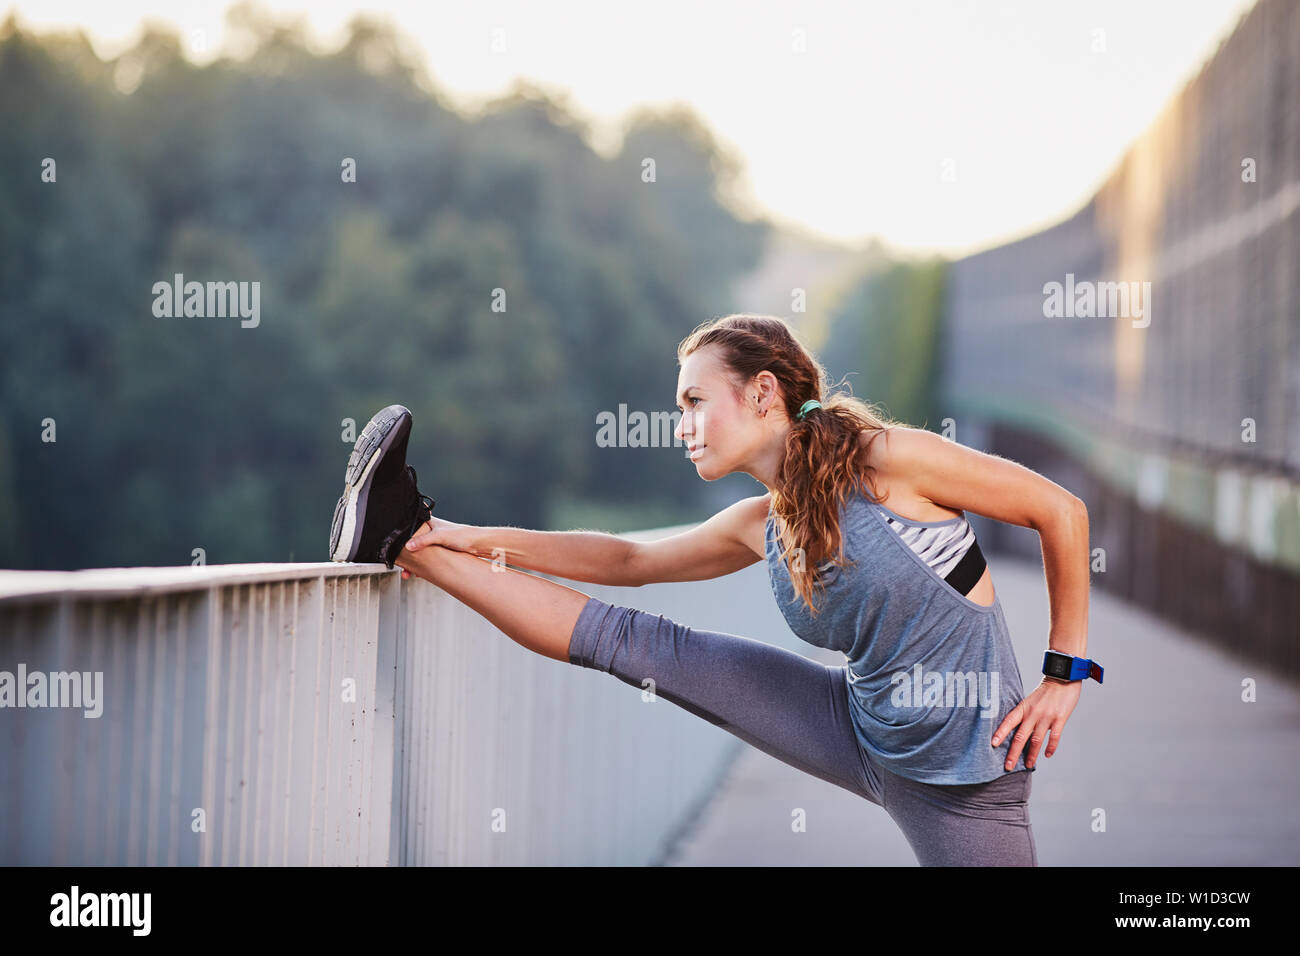 Fit woman stretching legs after running Stock Photo - Alamy